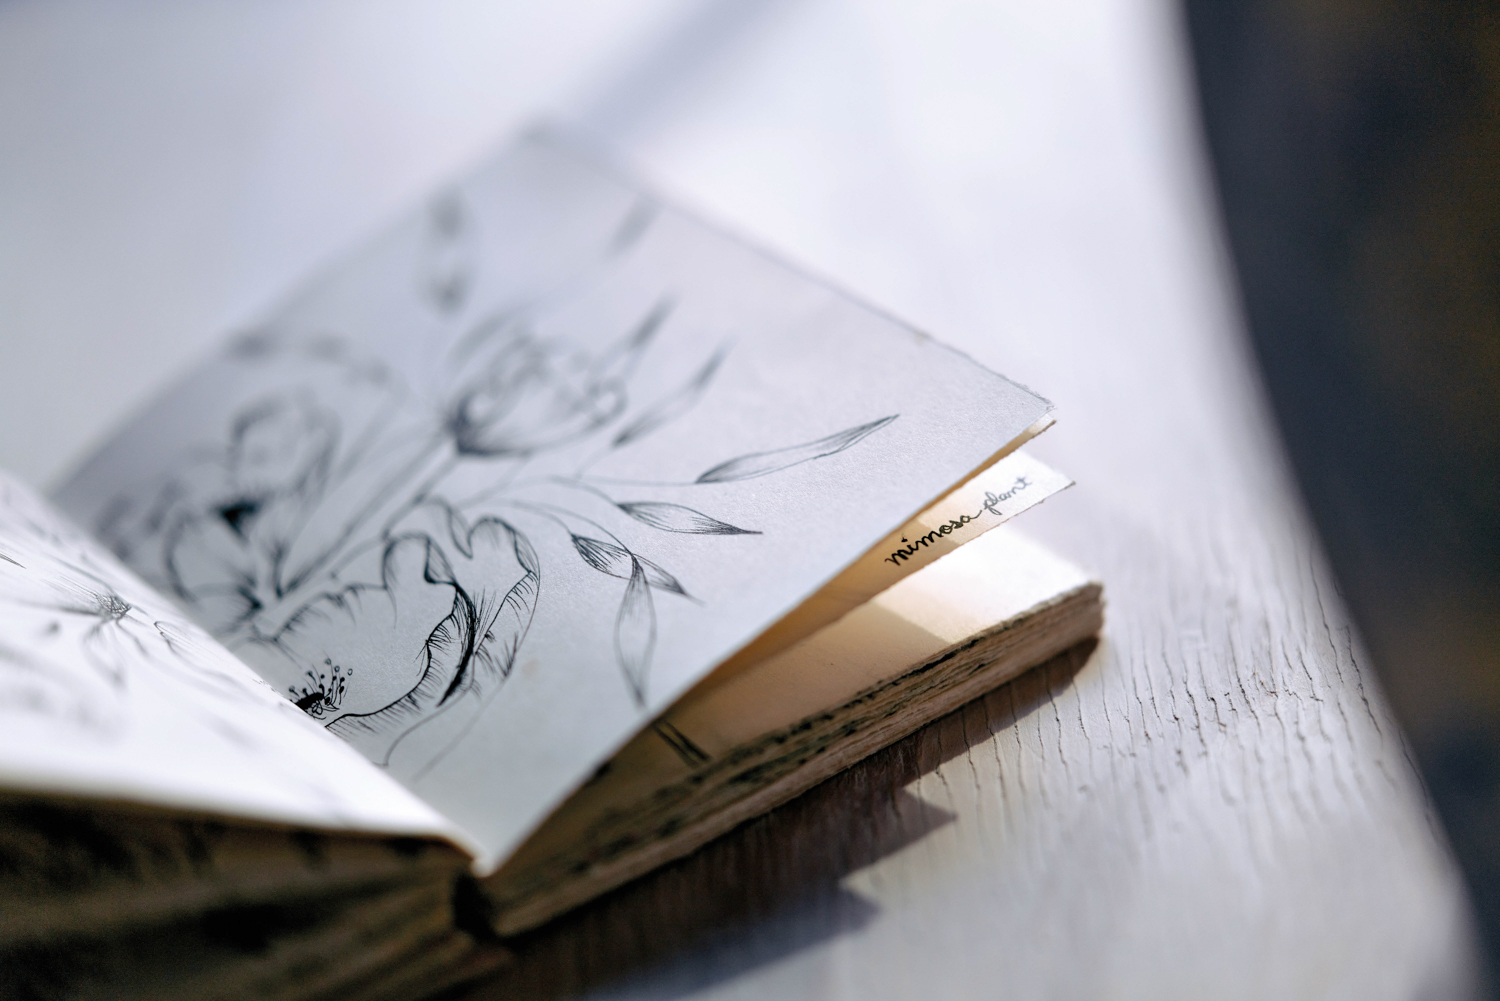 An open sketchbook featuring hand-drawn renderings of flowers and leaves by Maryfrances Carter